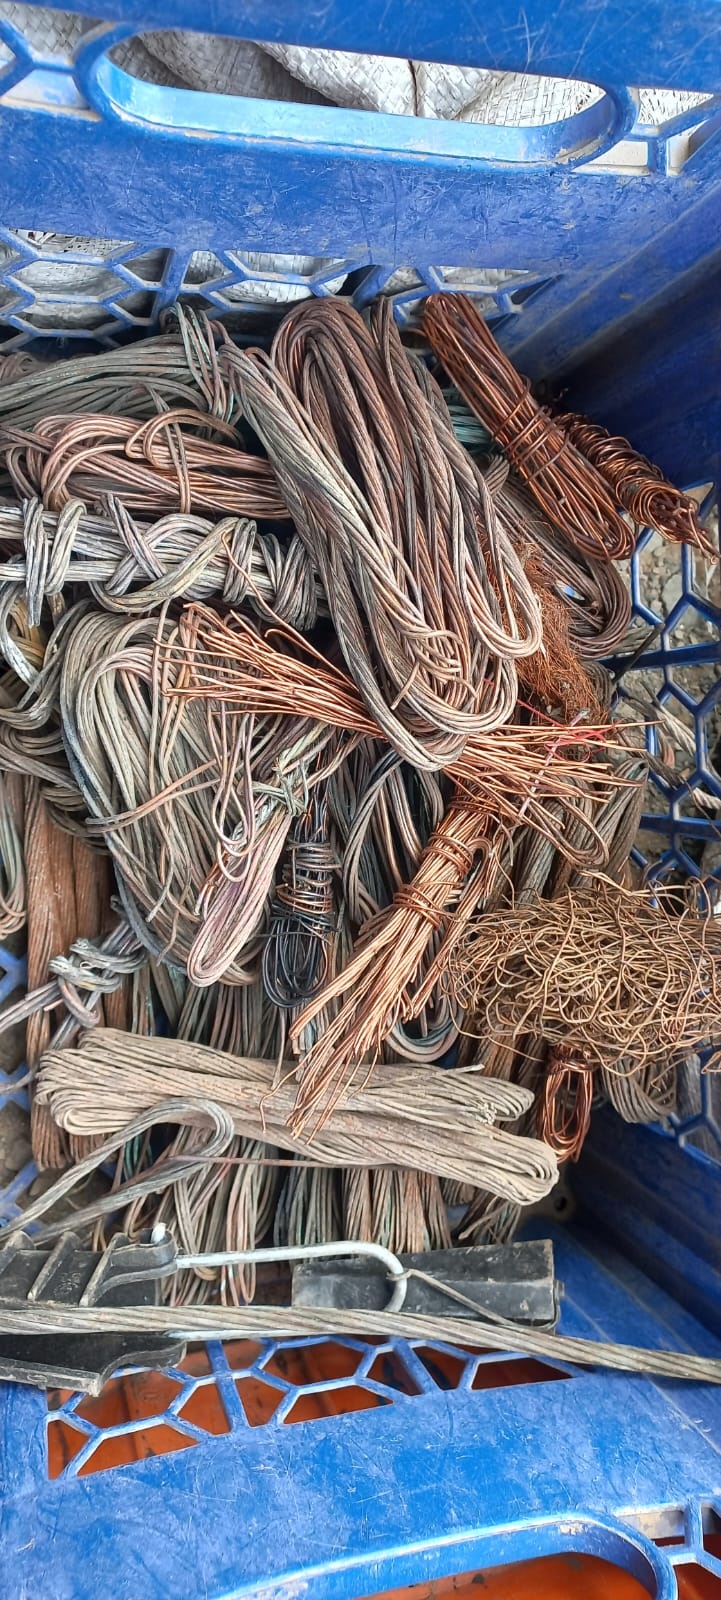 Suspect to appear in court for stolen copper cables